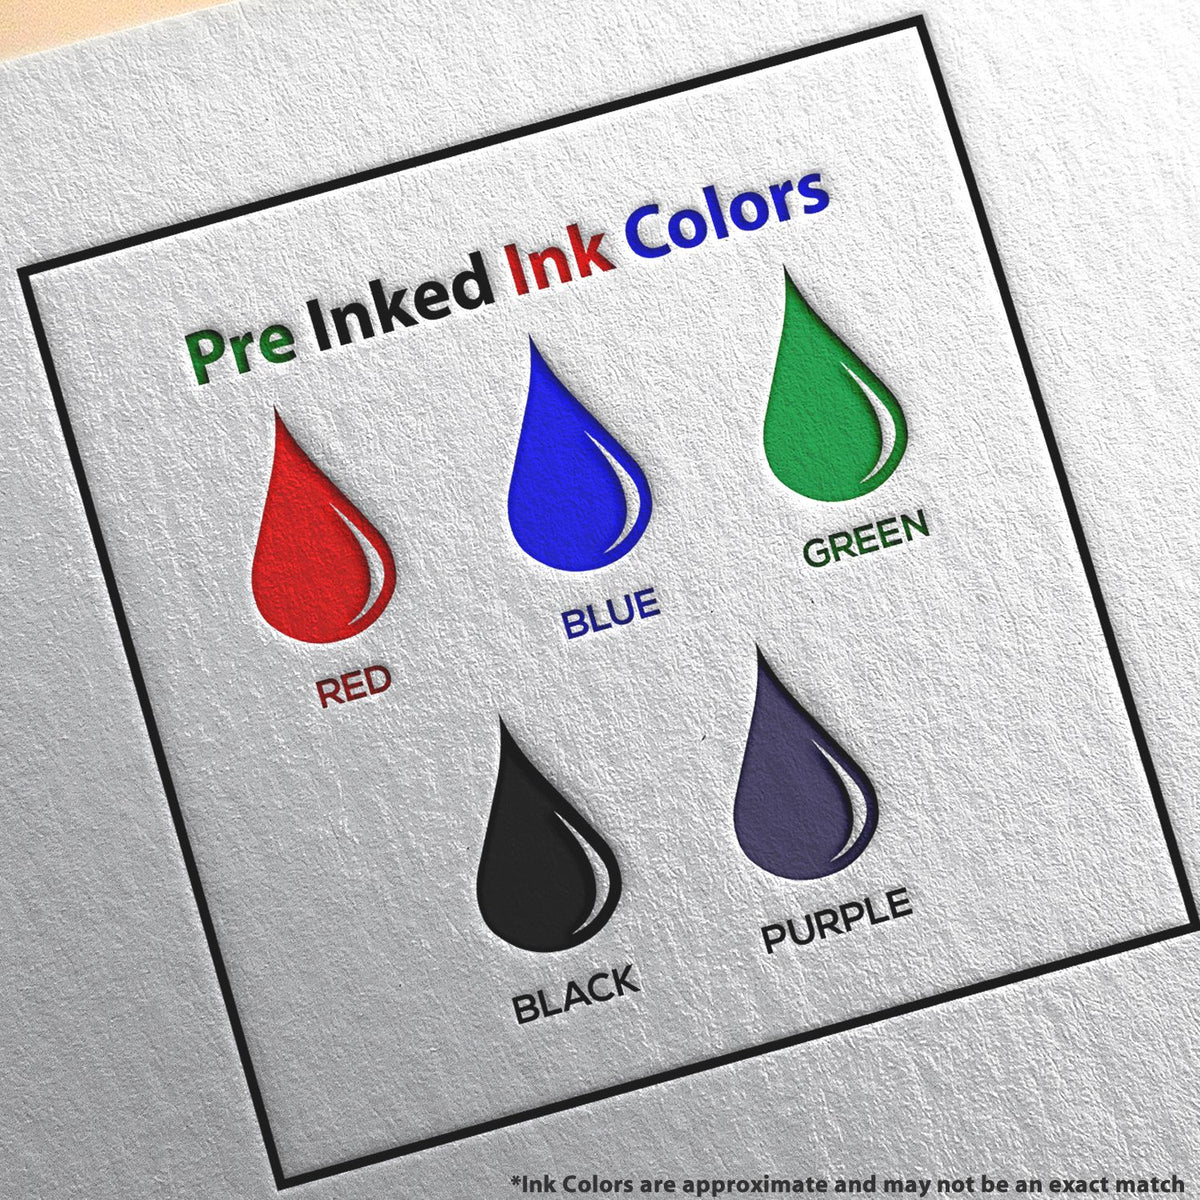 A picture showing the different ink colors or hues available for the Premium MaxLight Pre-Inked West Virginia Engineering Stamp product.